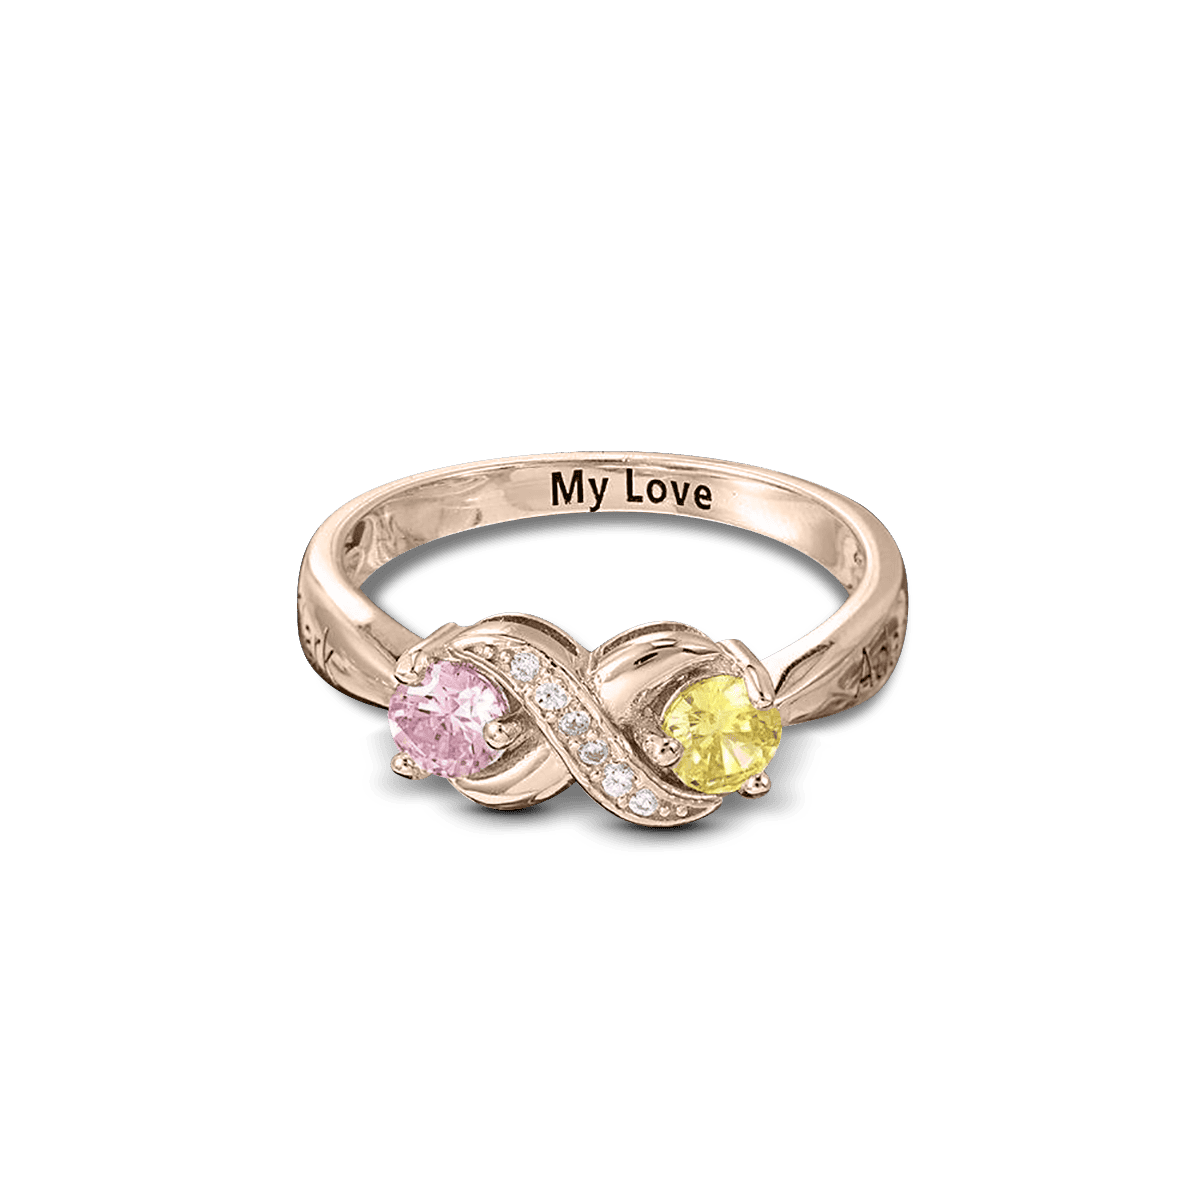 Personalized Infinity Round Cut Birthstones Ring - S925 Sterling Silver